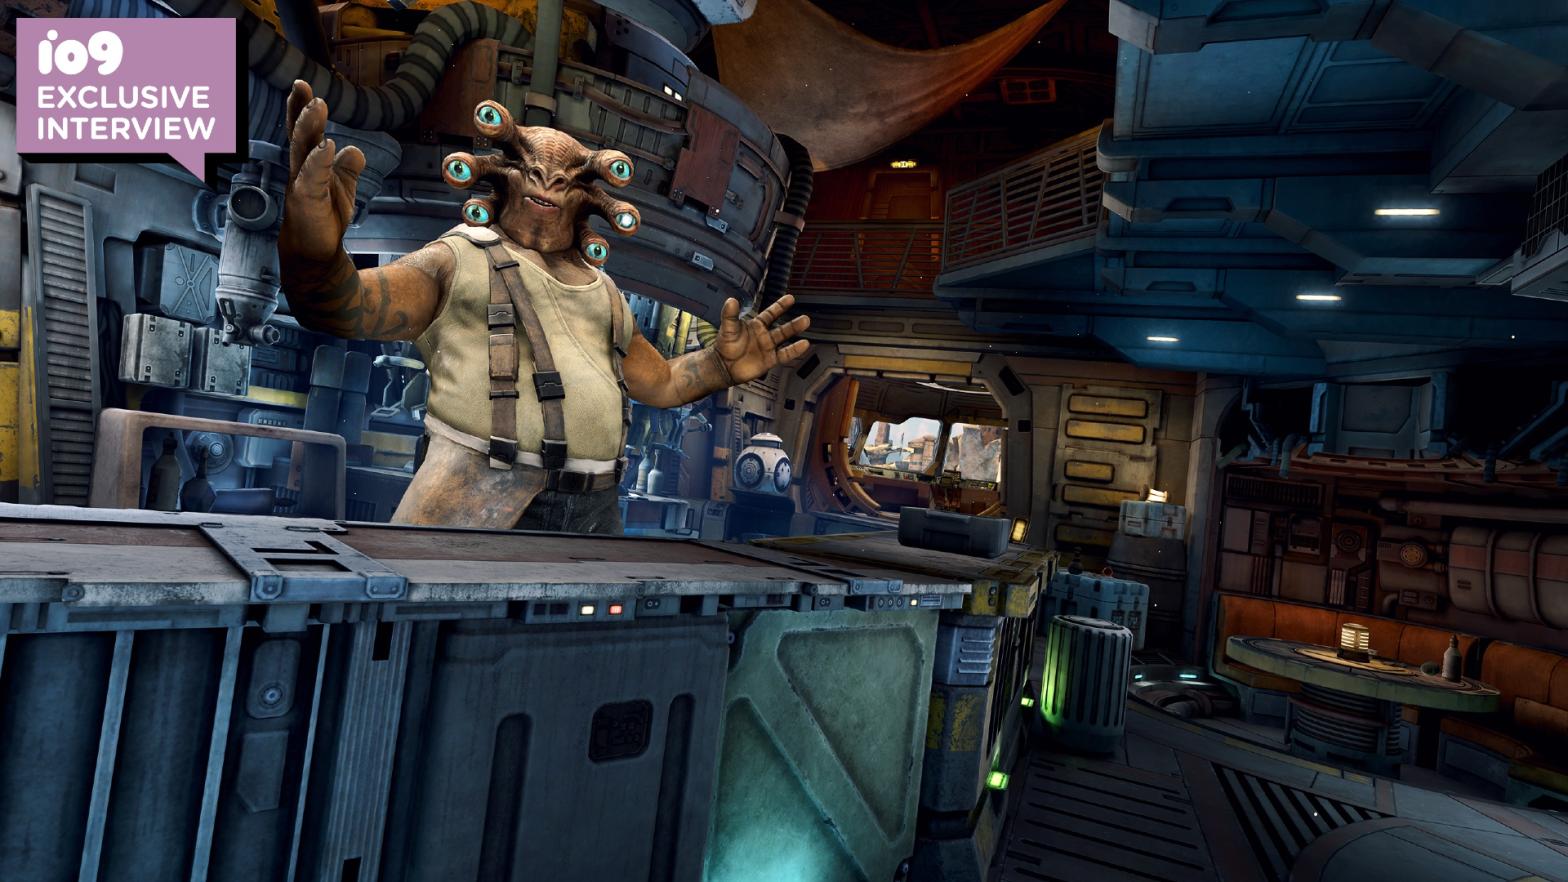 You'll get real friendly with Seezelslak (voiced by Bobby Moynihan) in Tales from the Galaxy's Edge. (Image: ILMxLAB)